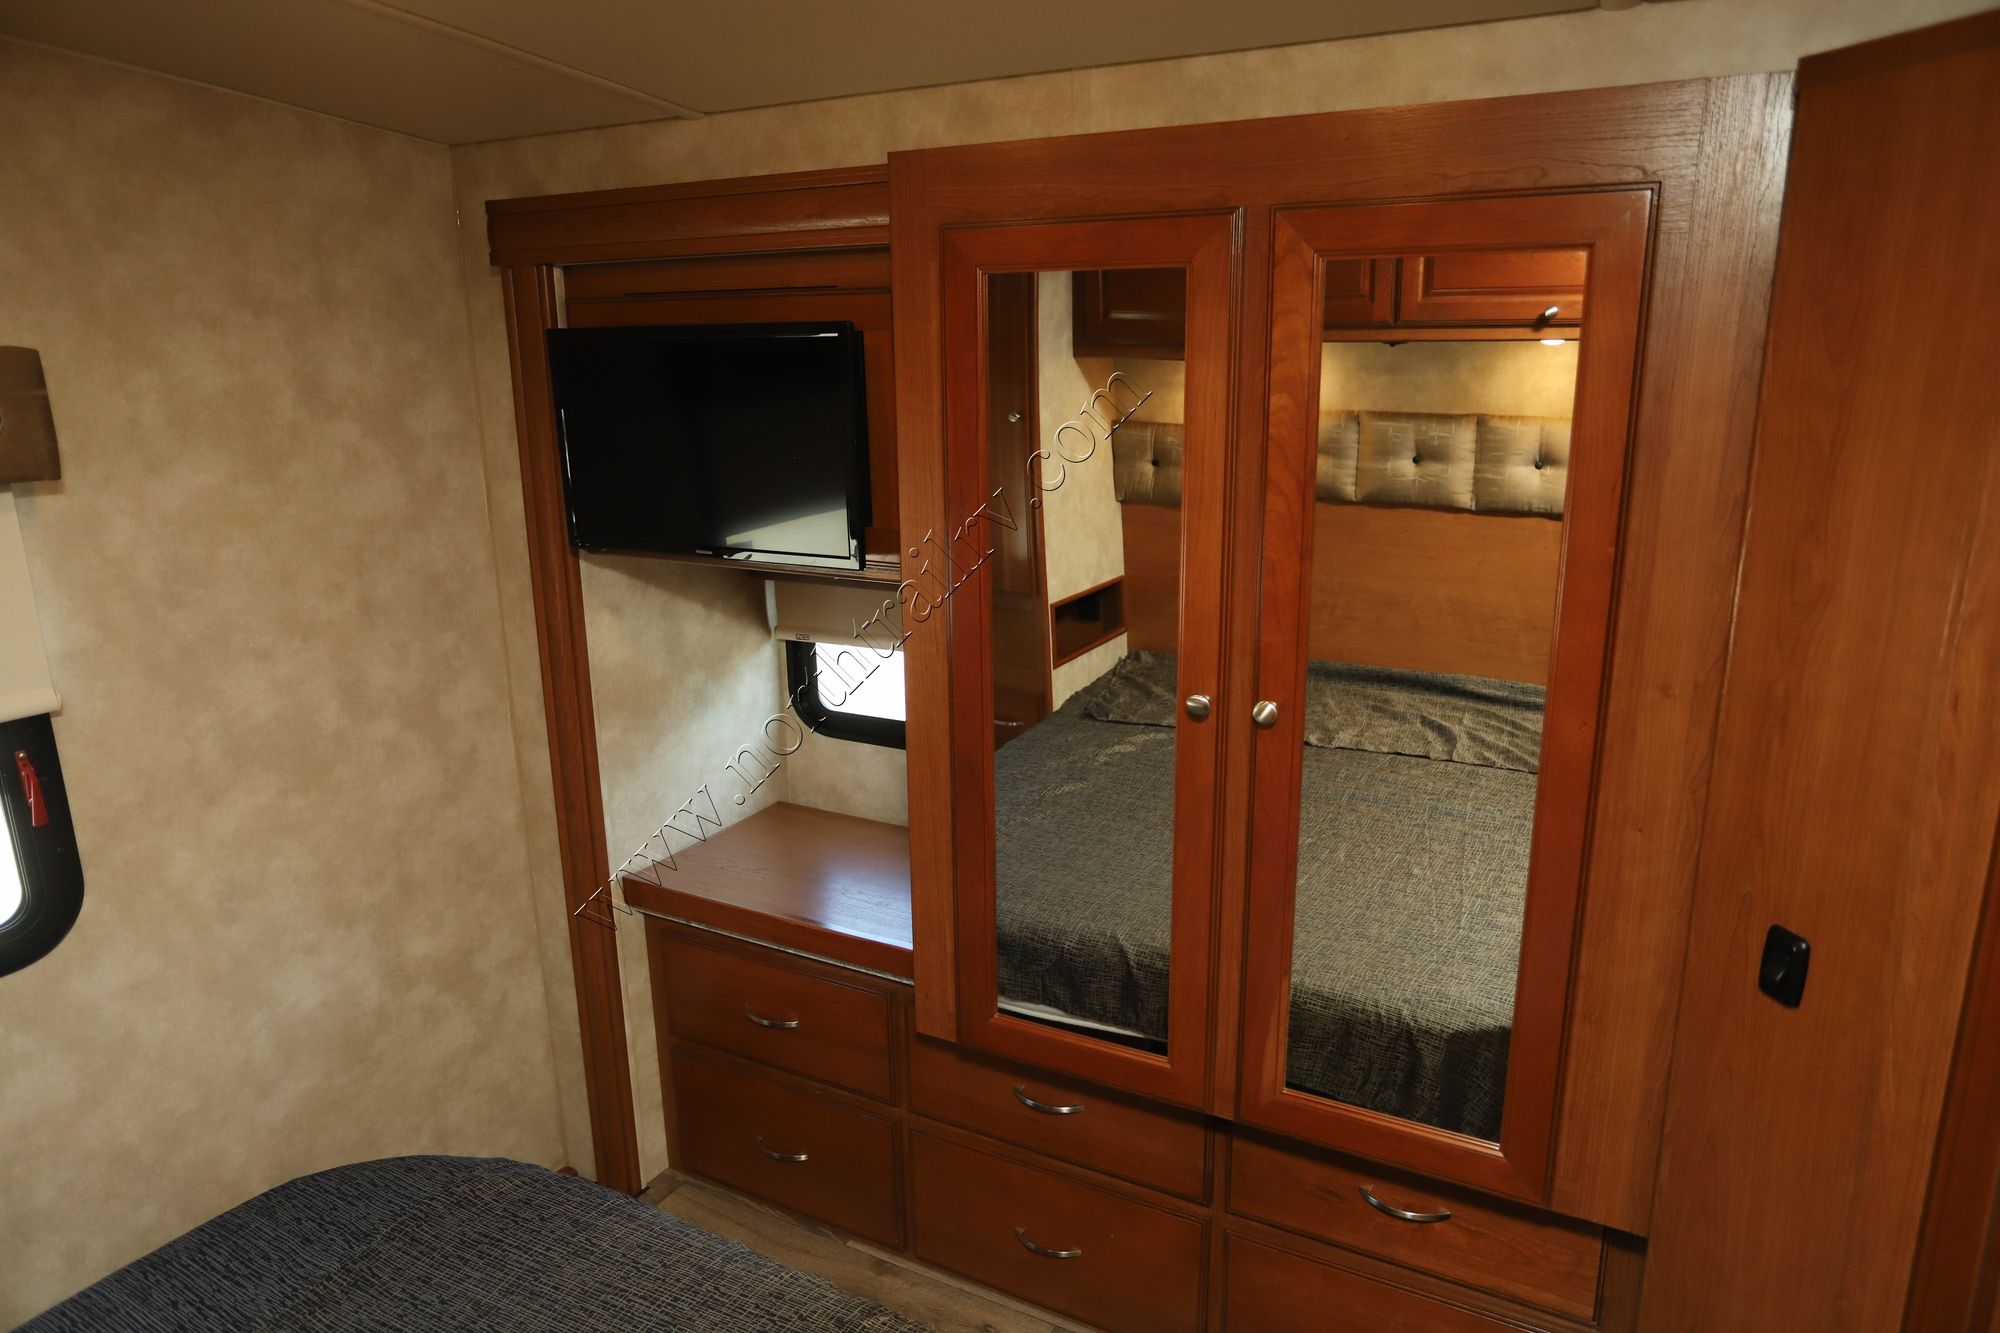 Used 2019 Winnebago Vista 31BE Class A  For Sale